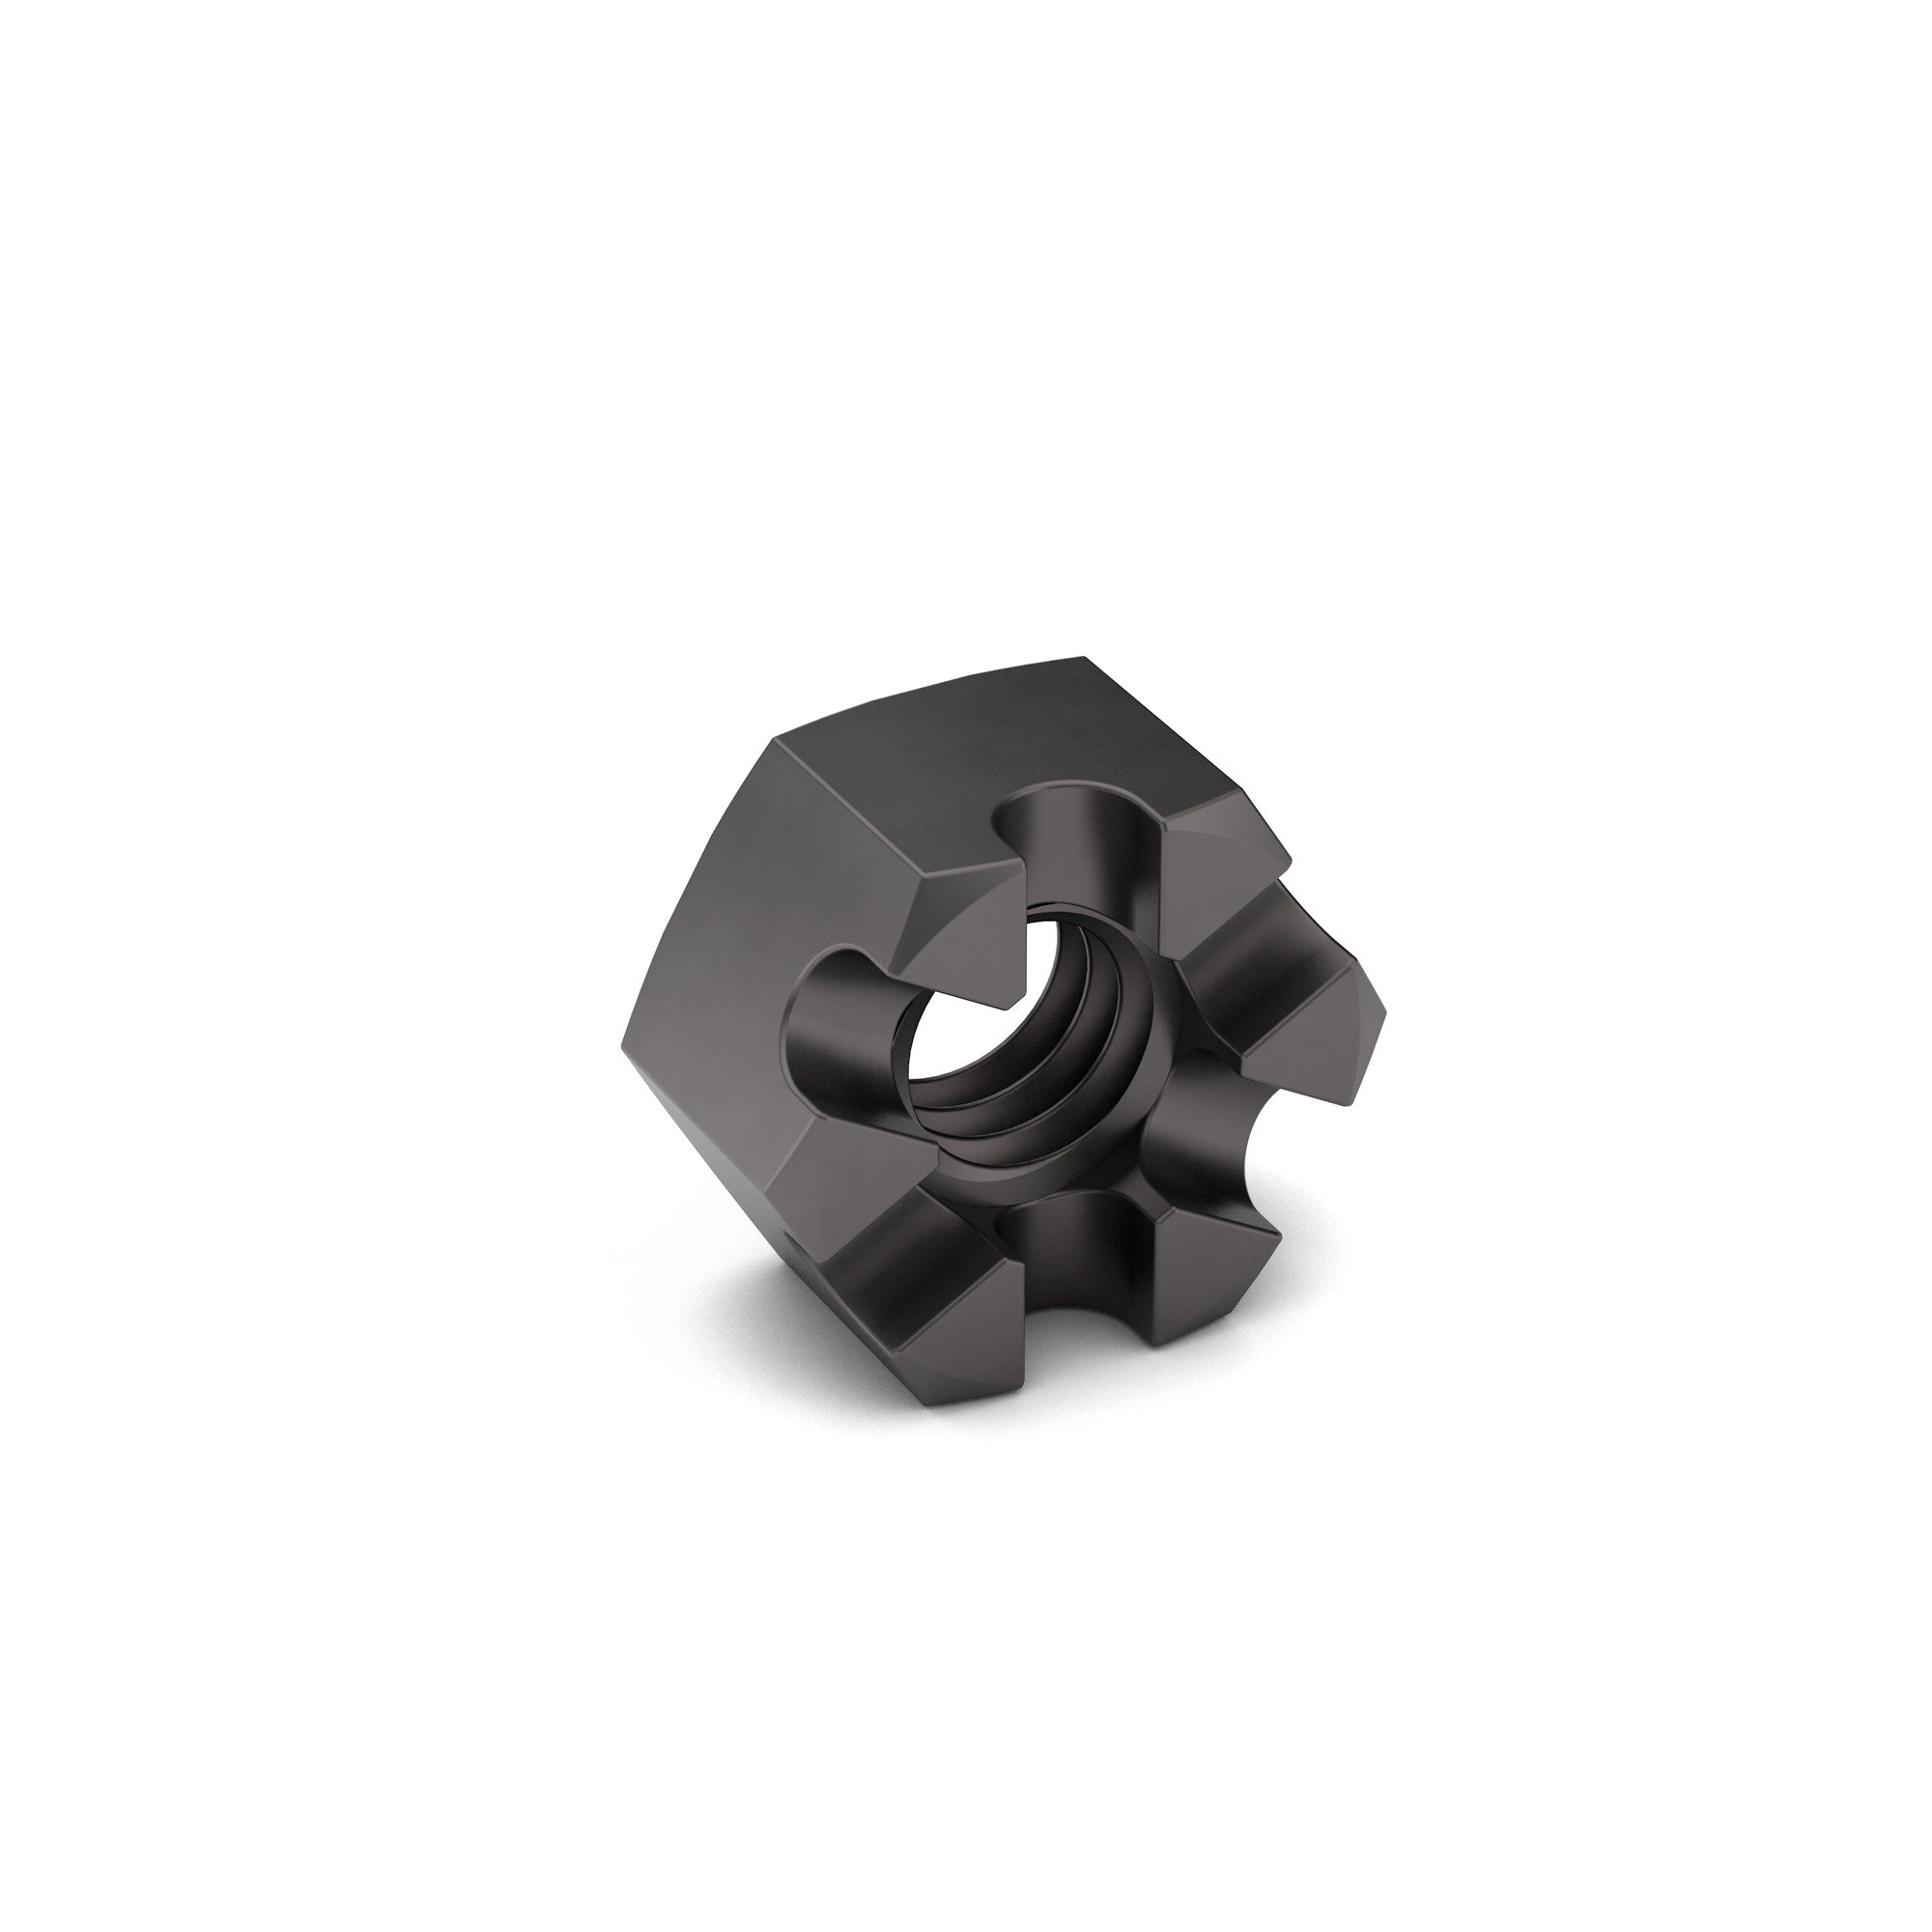 2-4 1/2 Carbon Steel Slotted Hex Nut Plain Finish